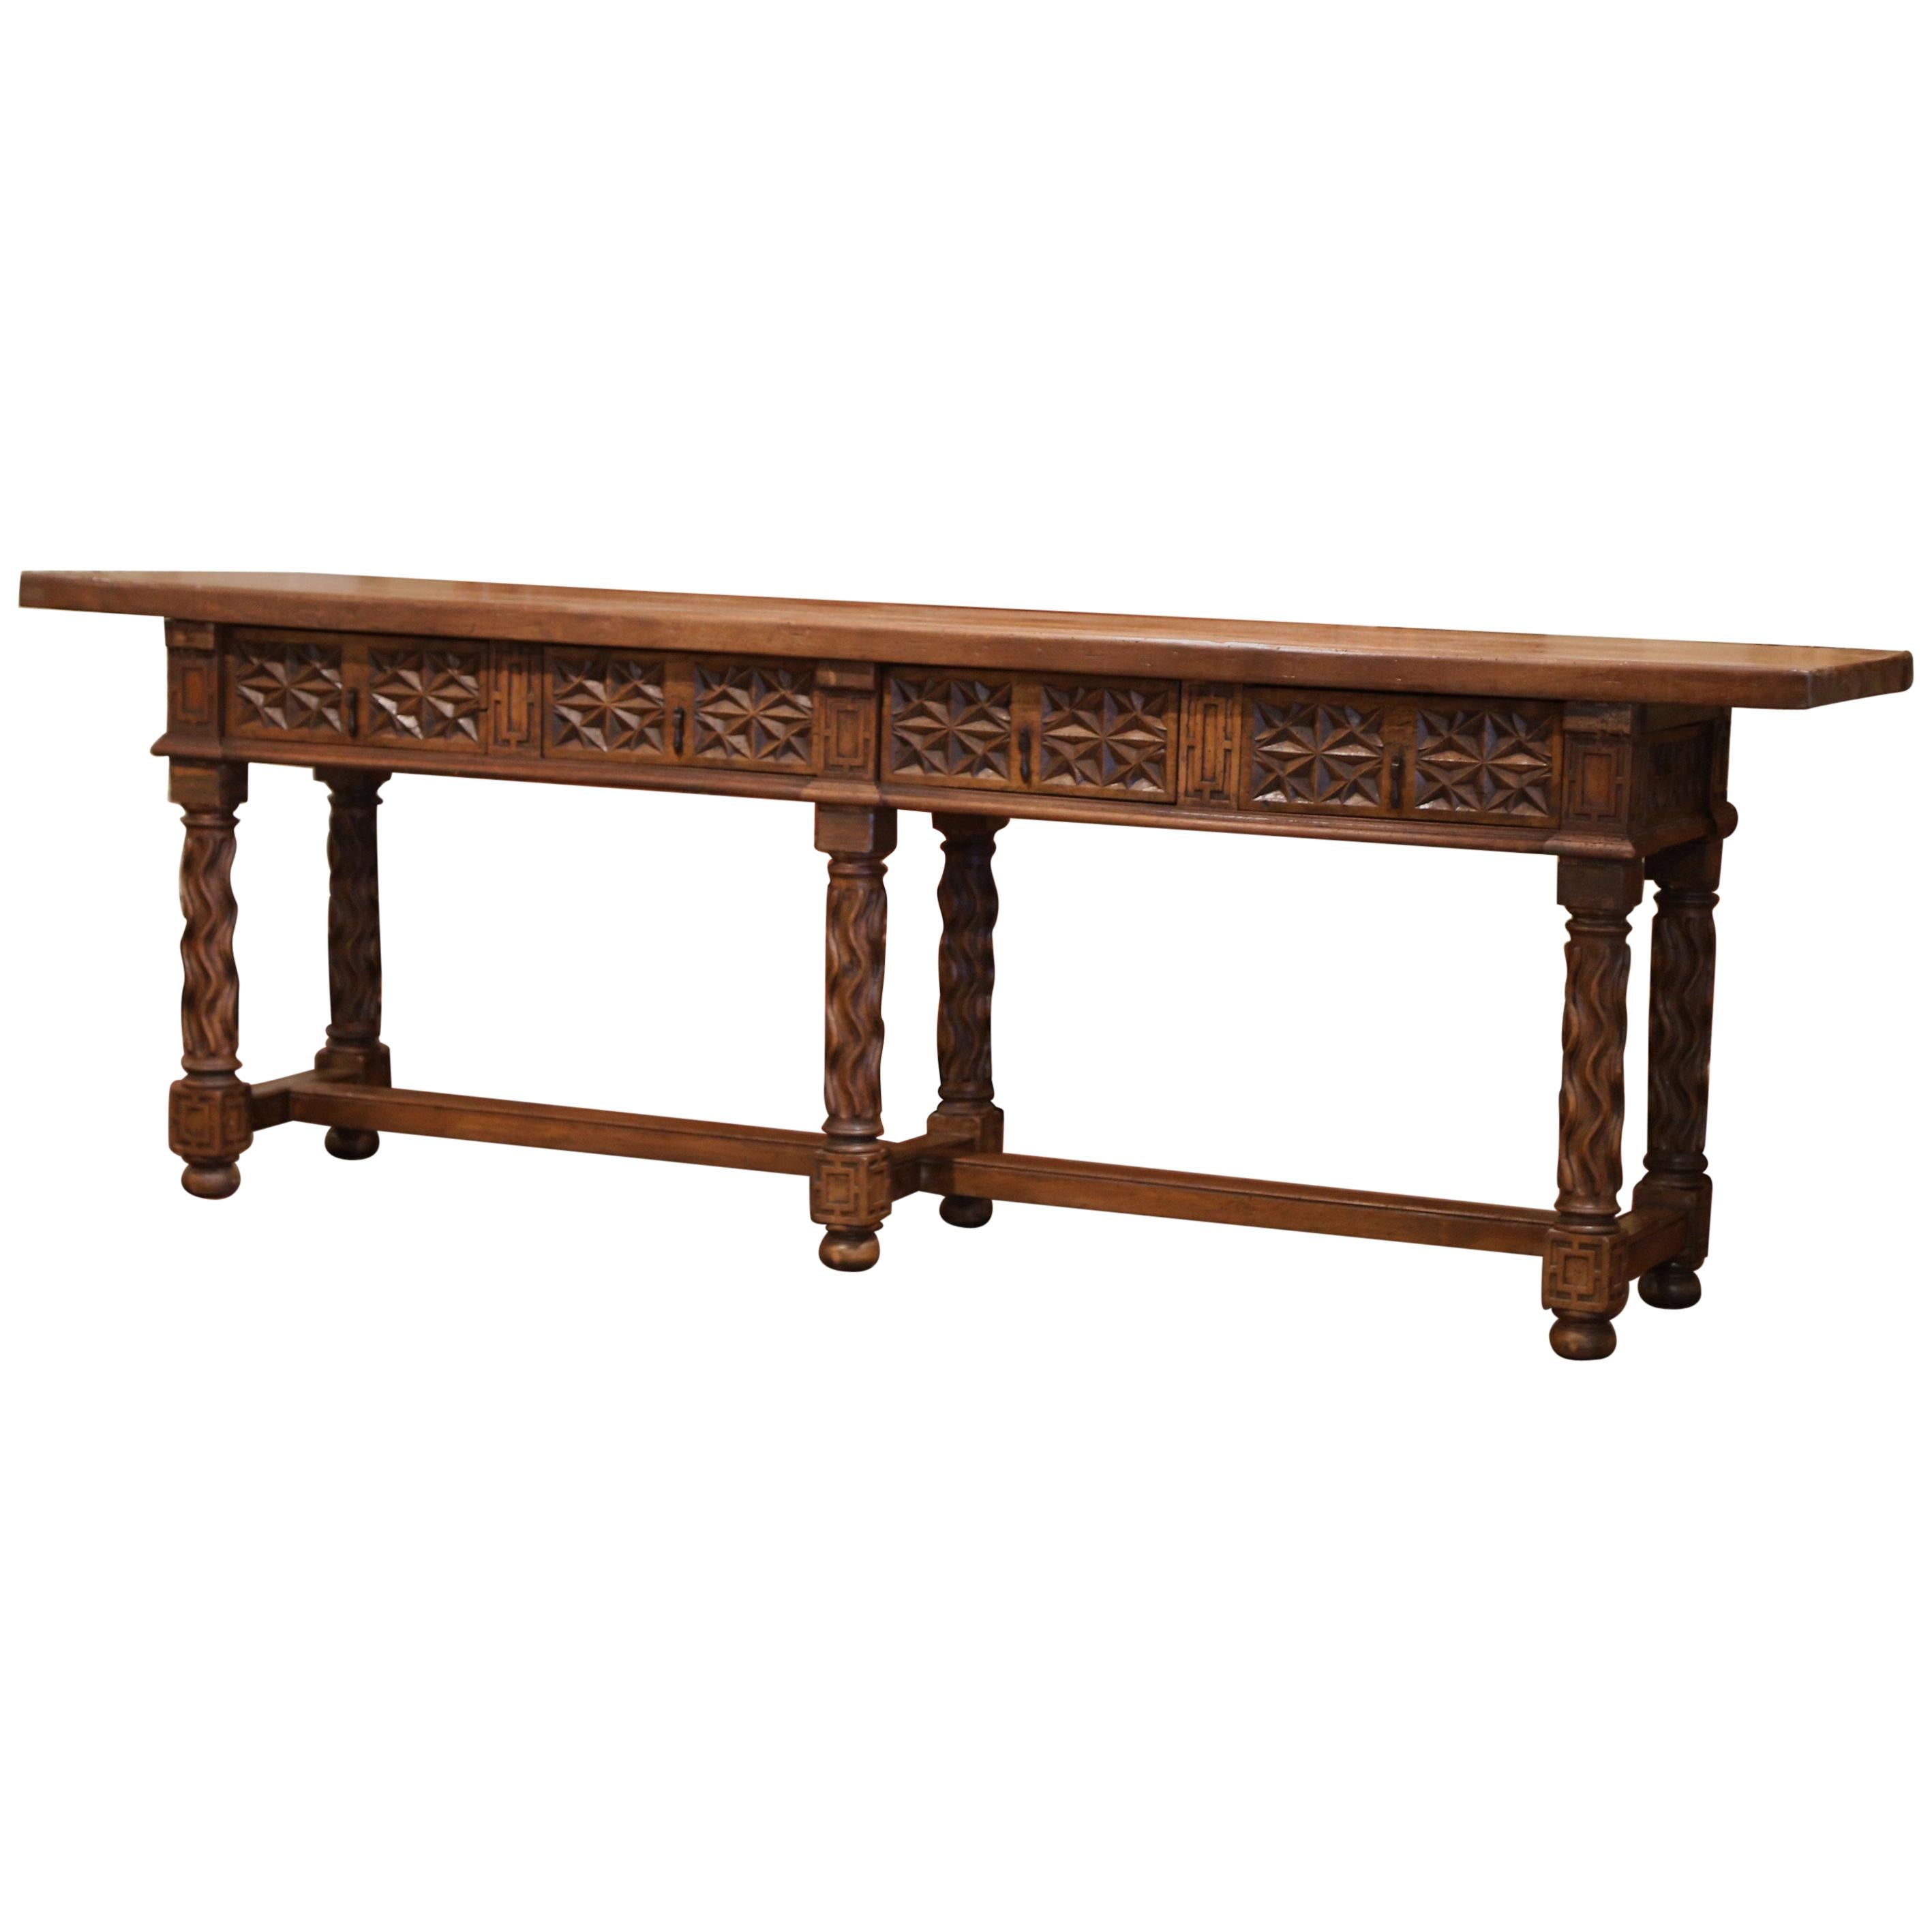 19th Century Spanish Carved Walnut Six-Leg Console Sofa Table with Drawers